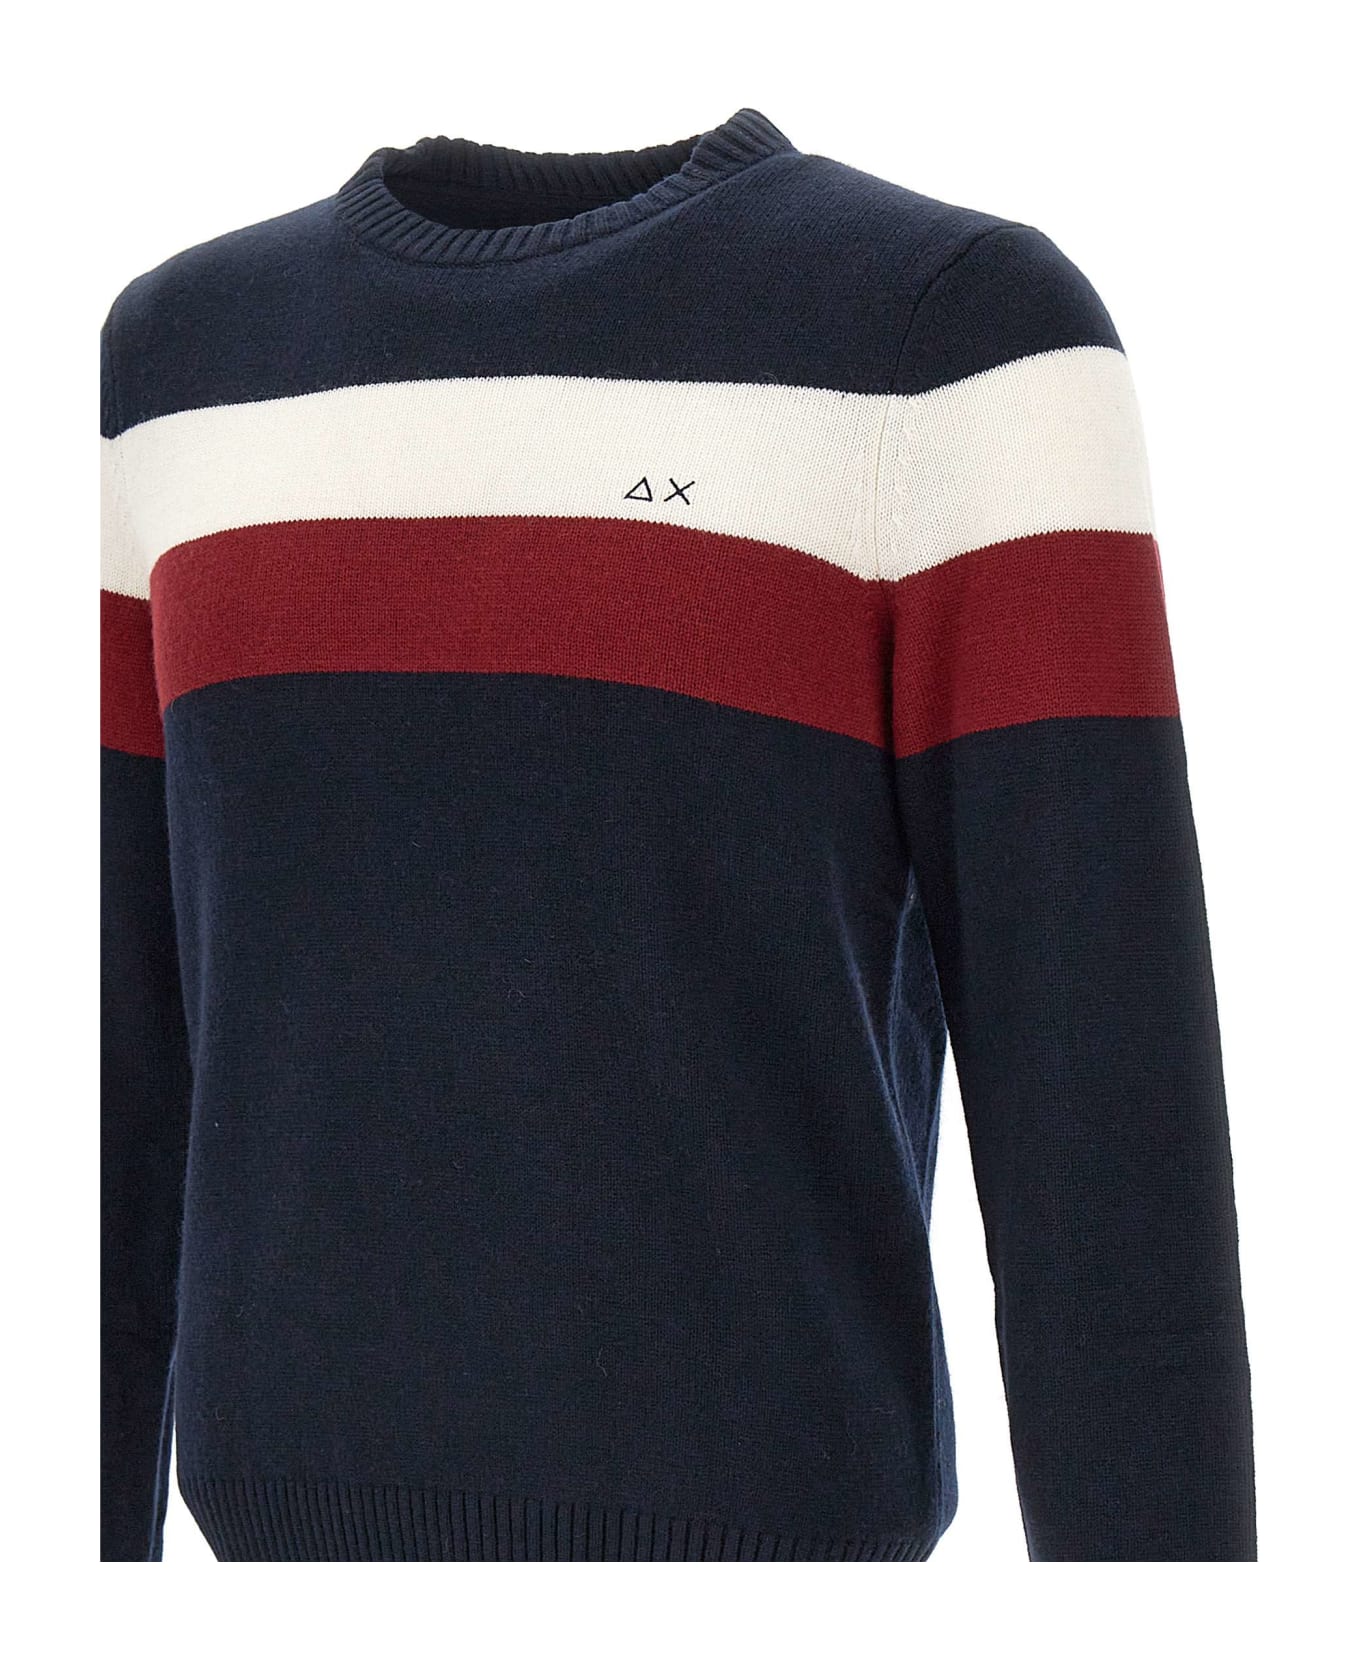 Sun 68 'fancy'wool, Viscose And Cashmere Sweater Sweater - NAVY BLUE ニットウェア